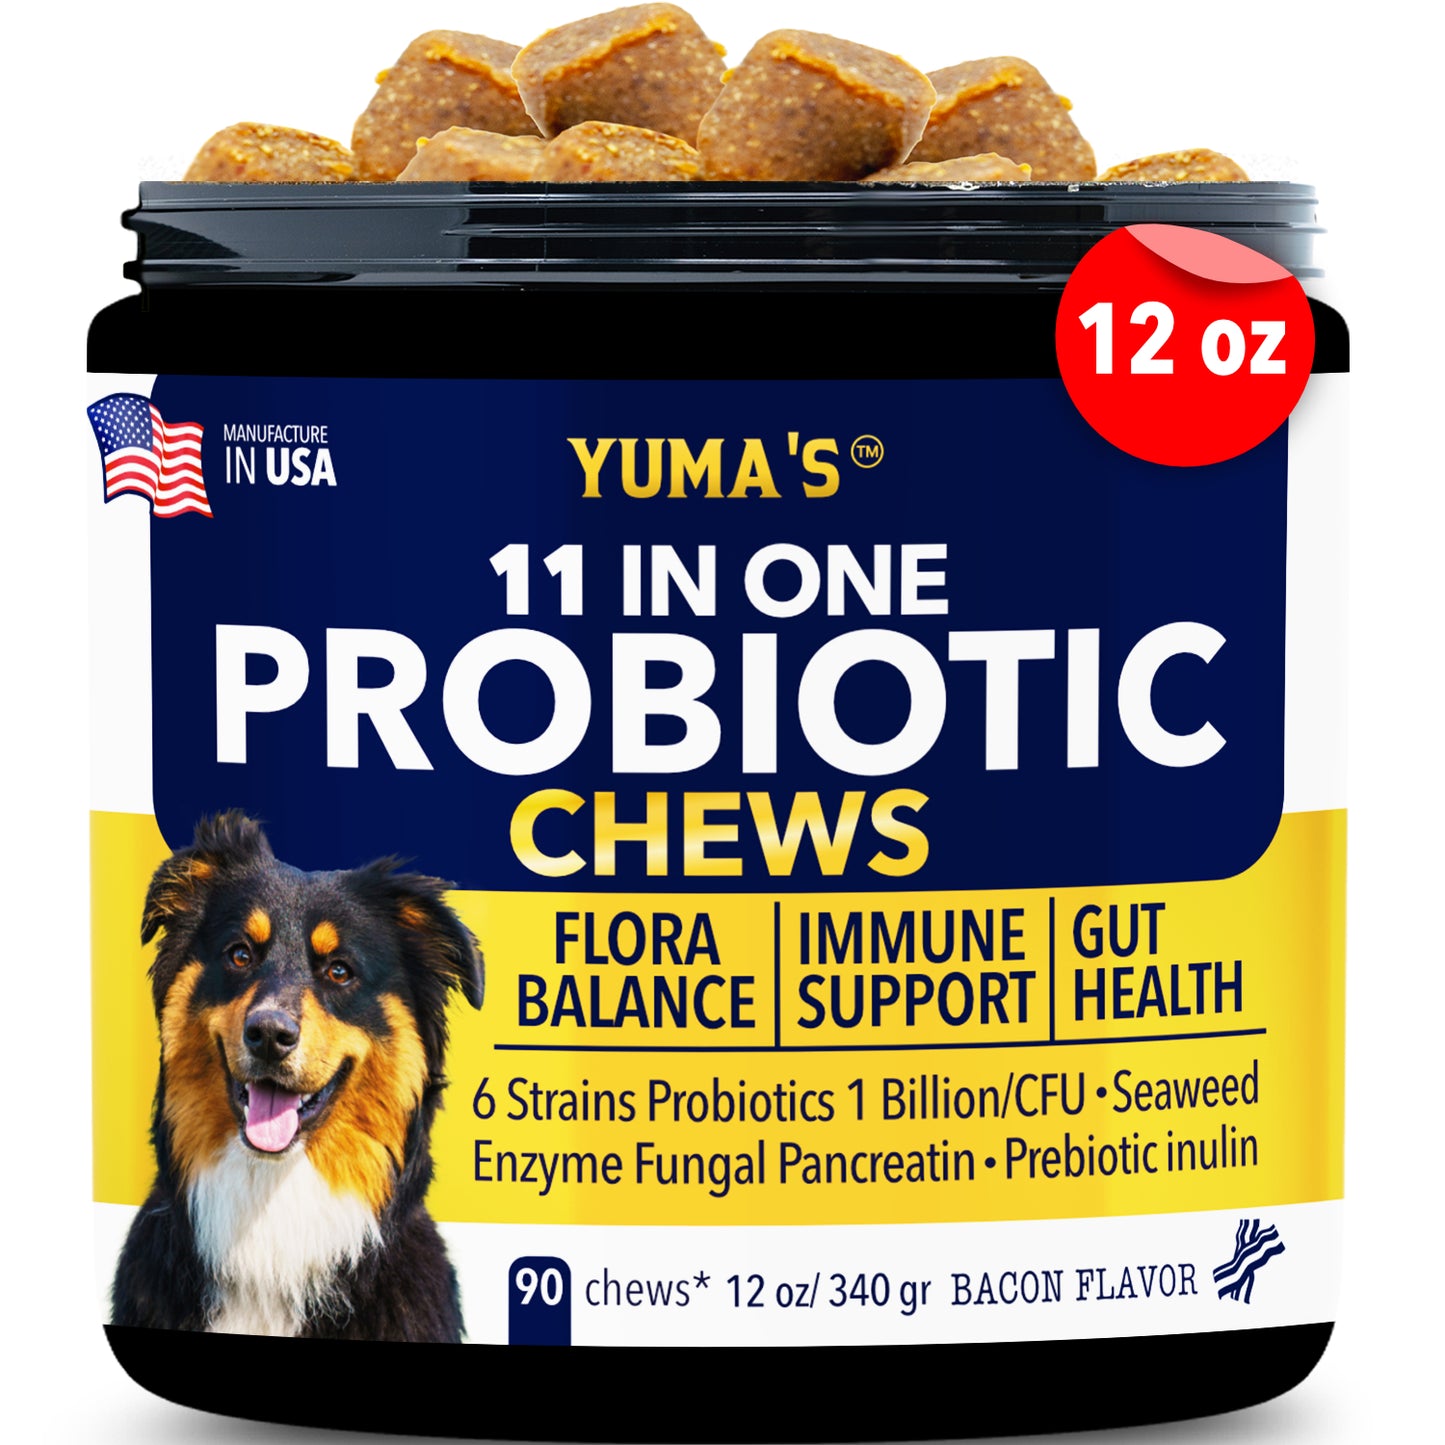 11 in one probiotic chews